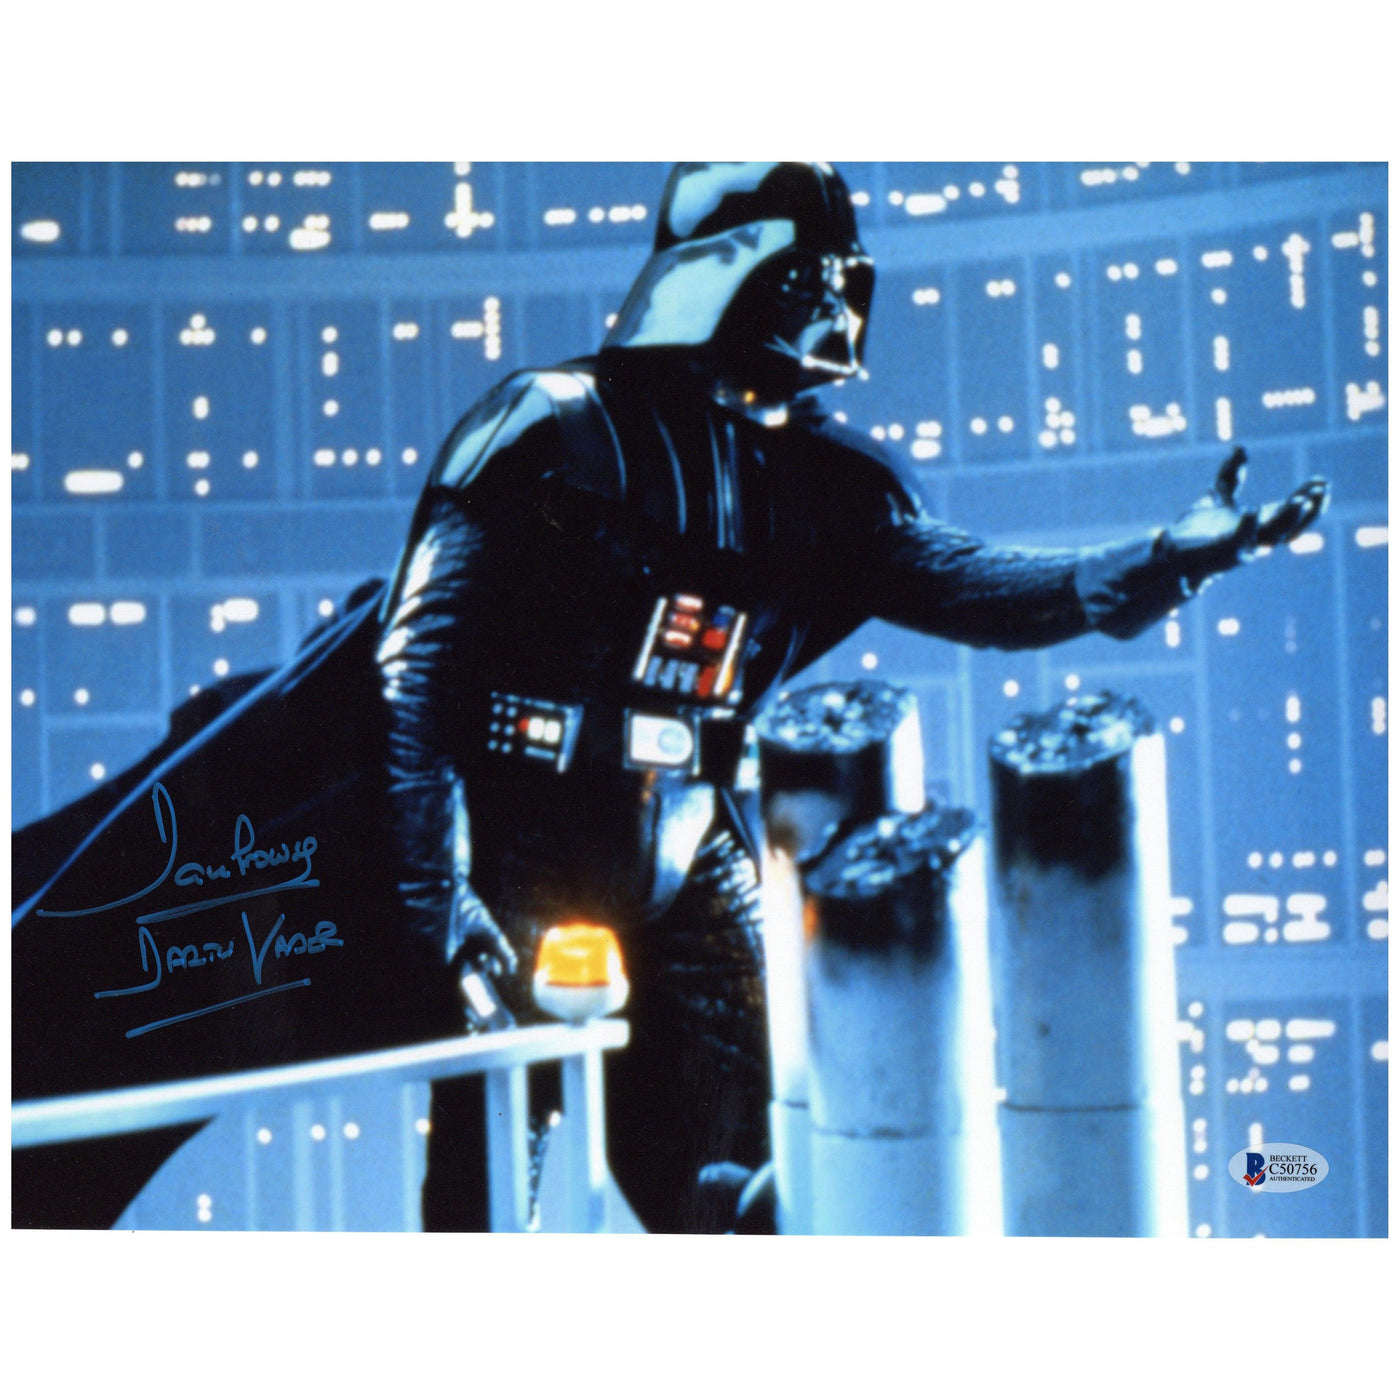 Dave Prowse Signed 11x14 Photo Star Wars Darth Vader Autographed Beckett COA 2